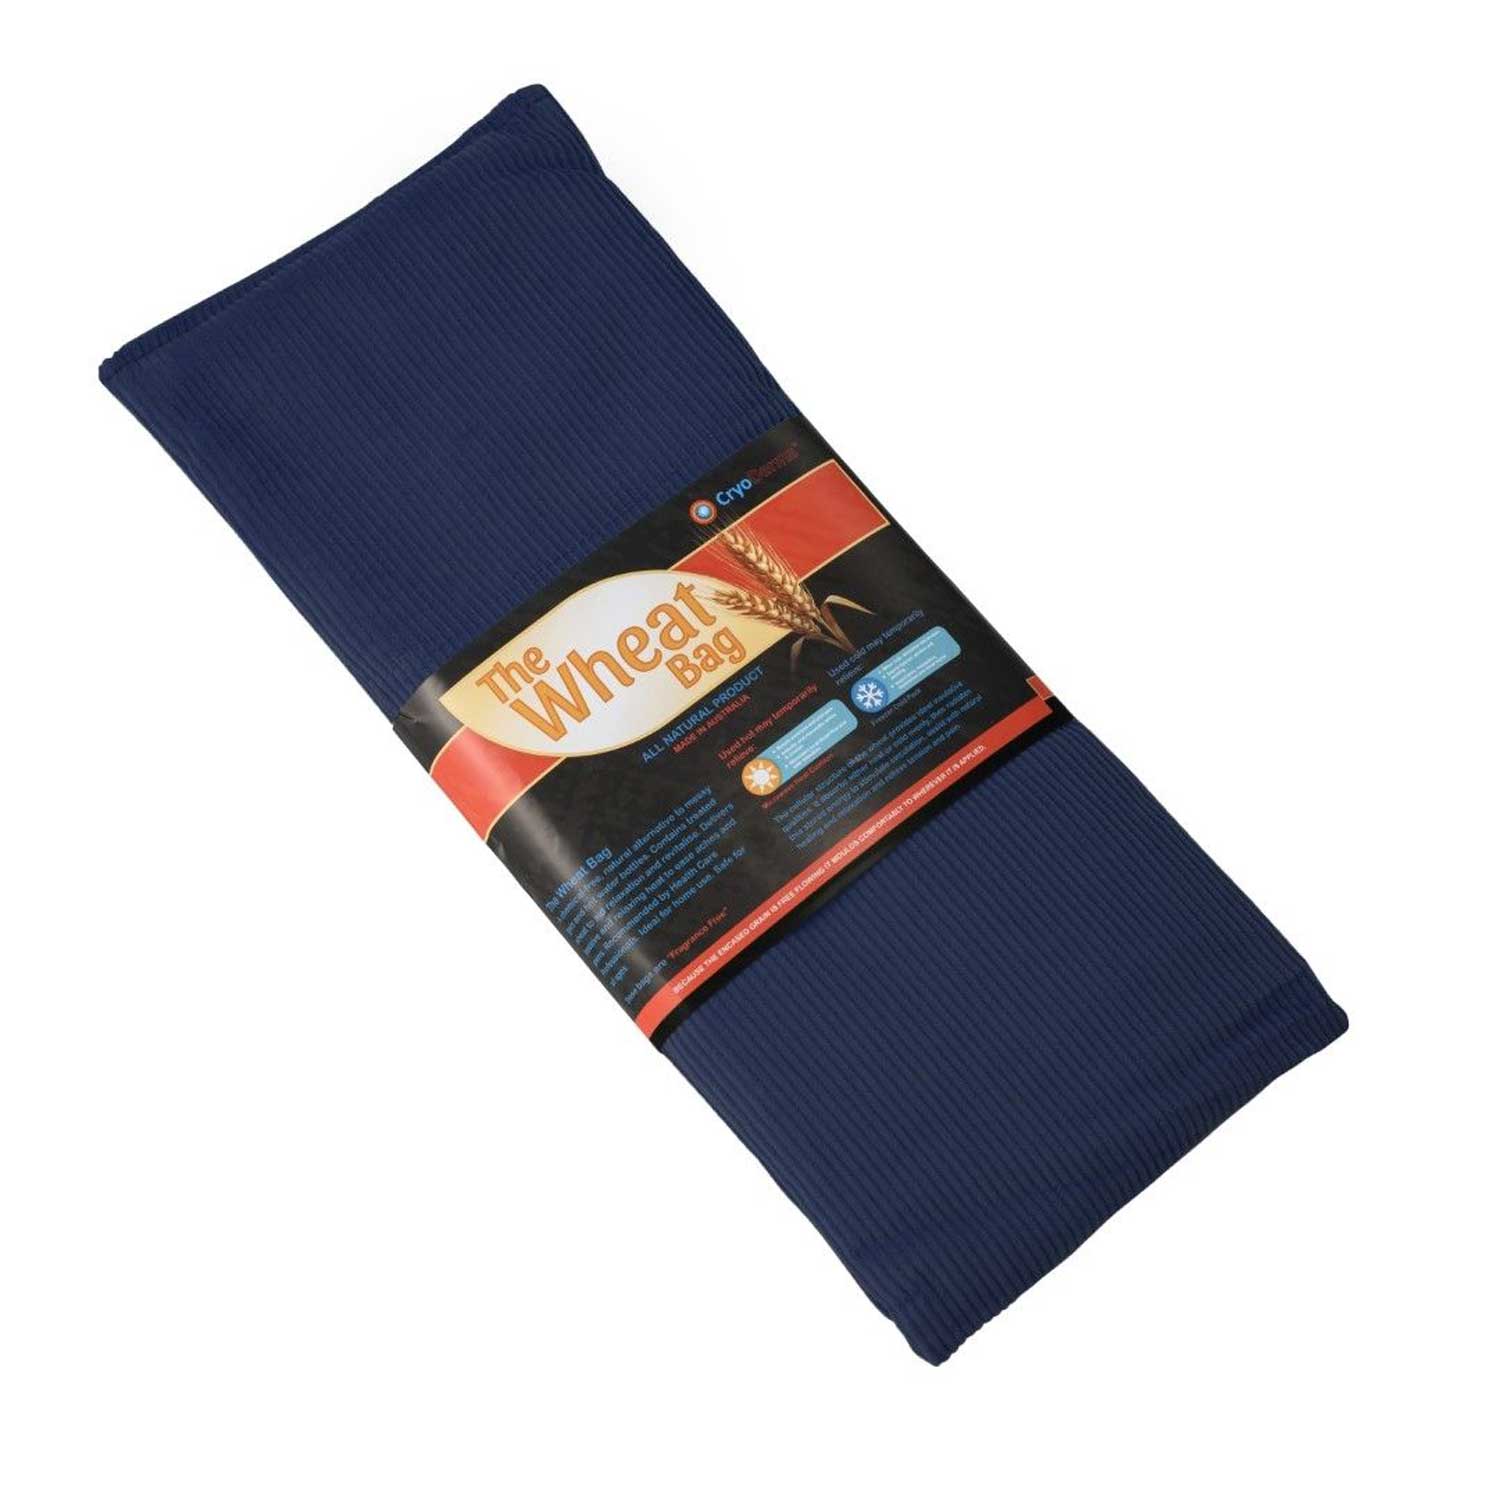 Wheat Bag Heat Therapy For Natural Pain relief - Navy